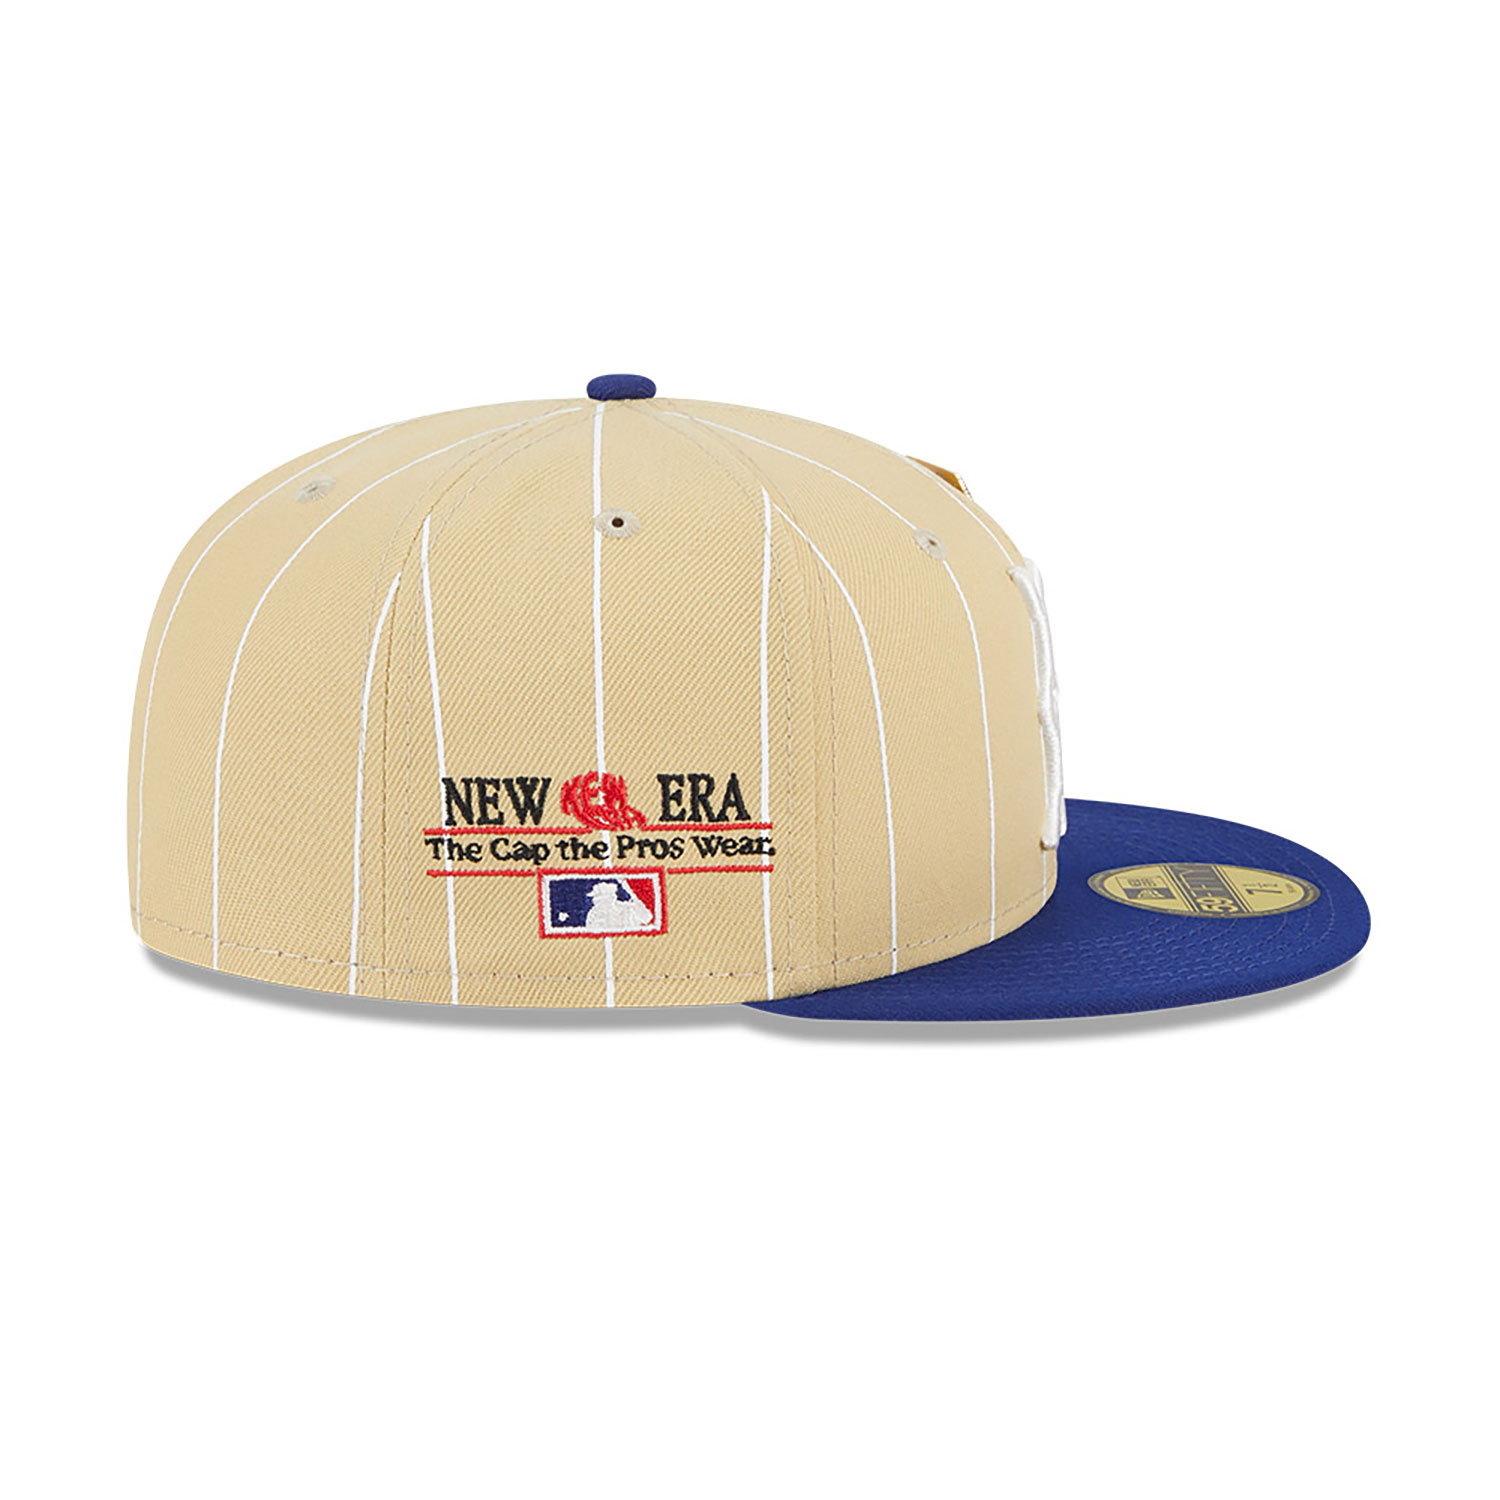 Brooklyn Dodgers 59FIFTY Day Light Beigh 59FIFTY Fitted Cap